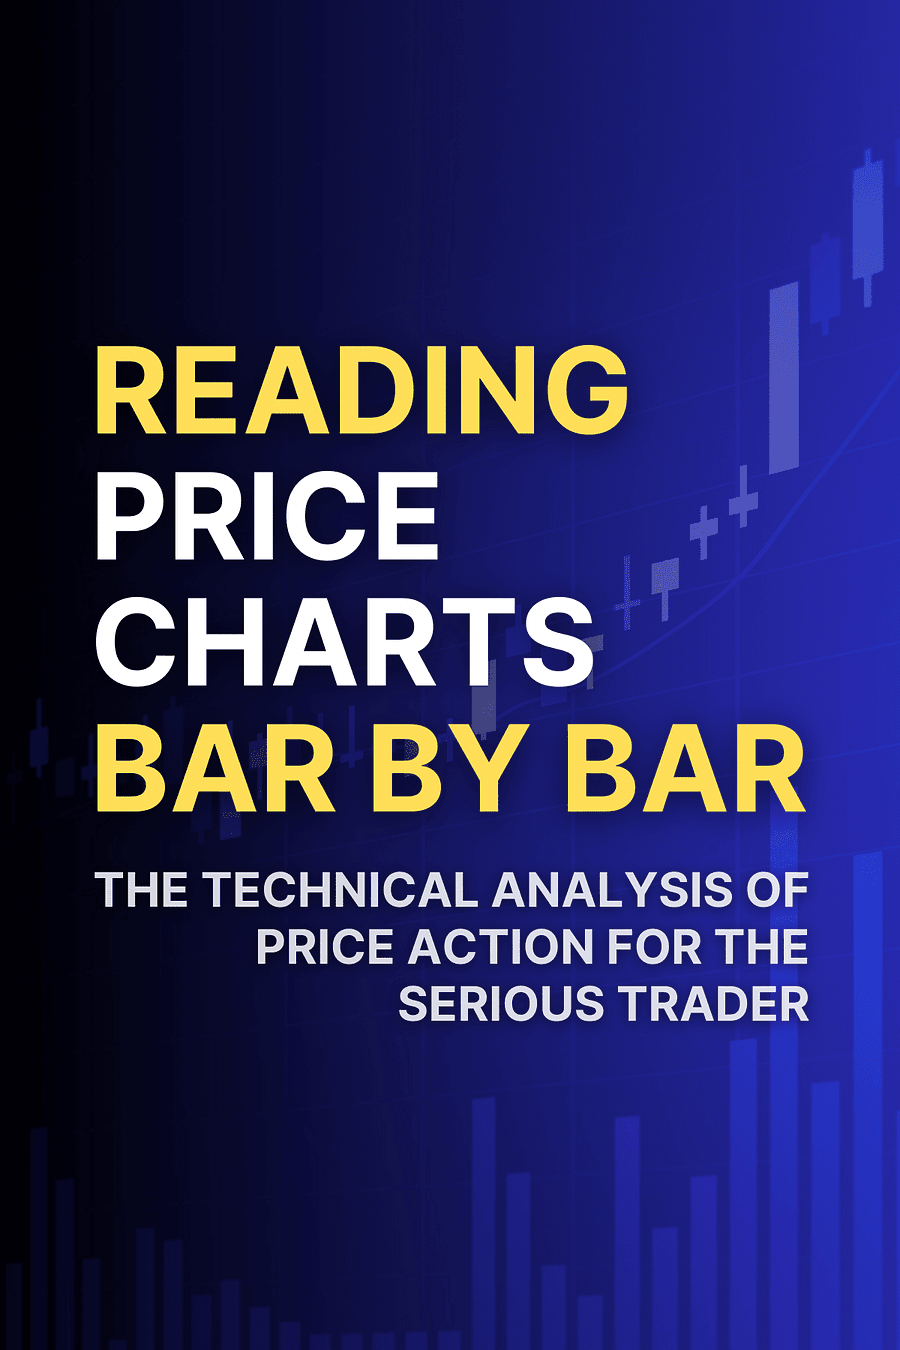 Reading Price Charts Bar by Bar by Al Brooks - Book Summary